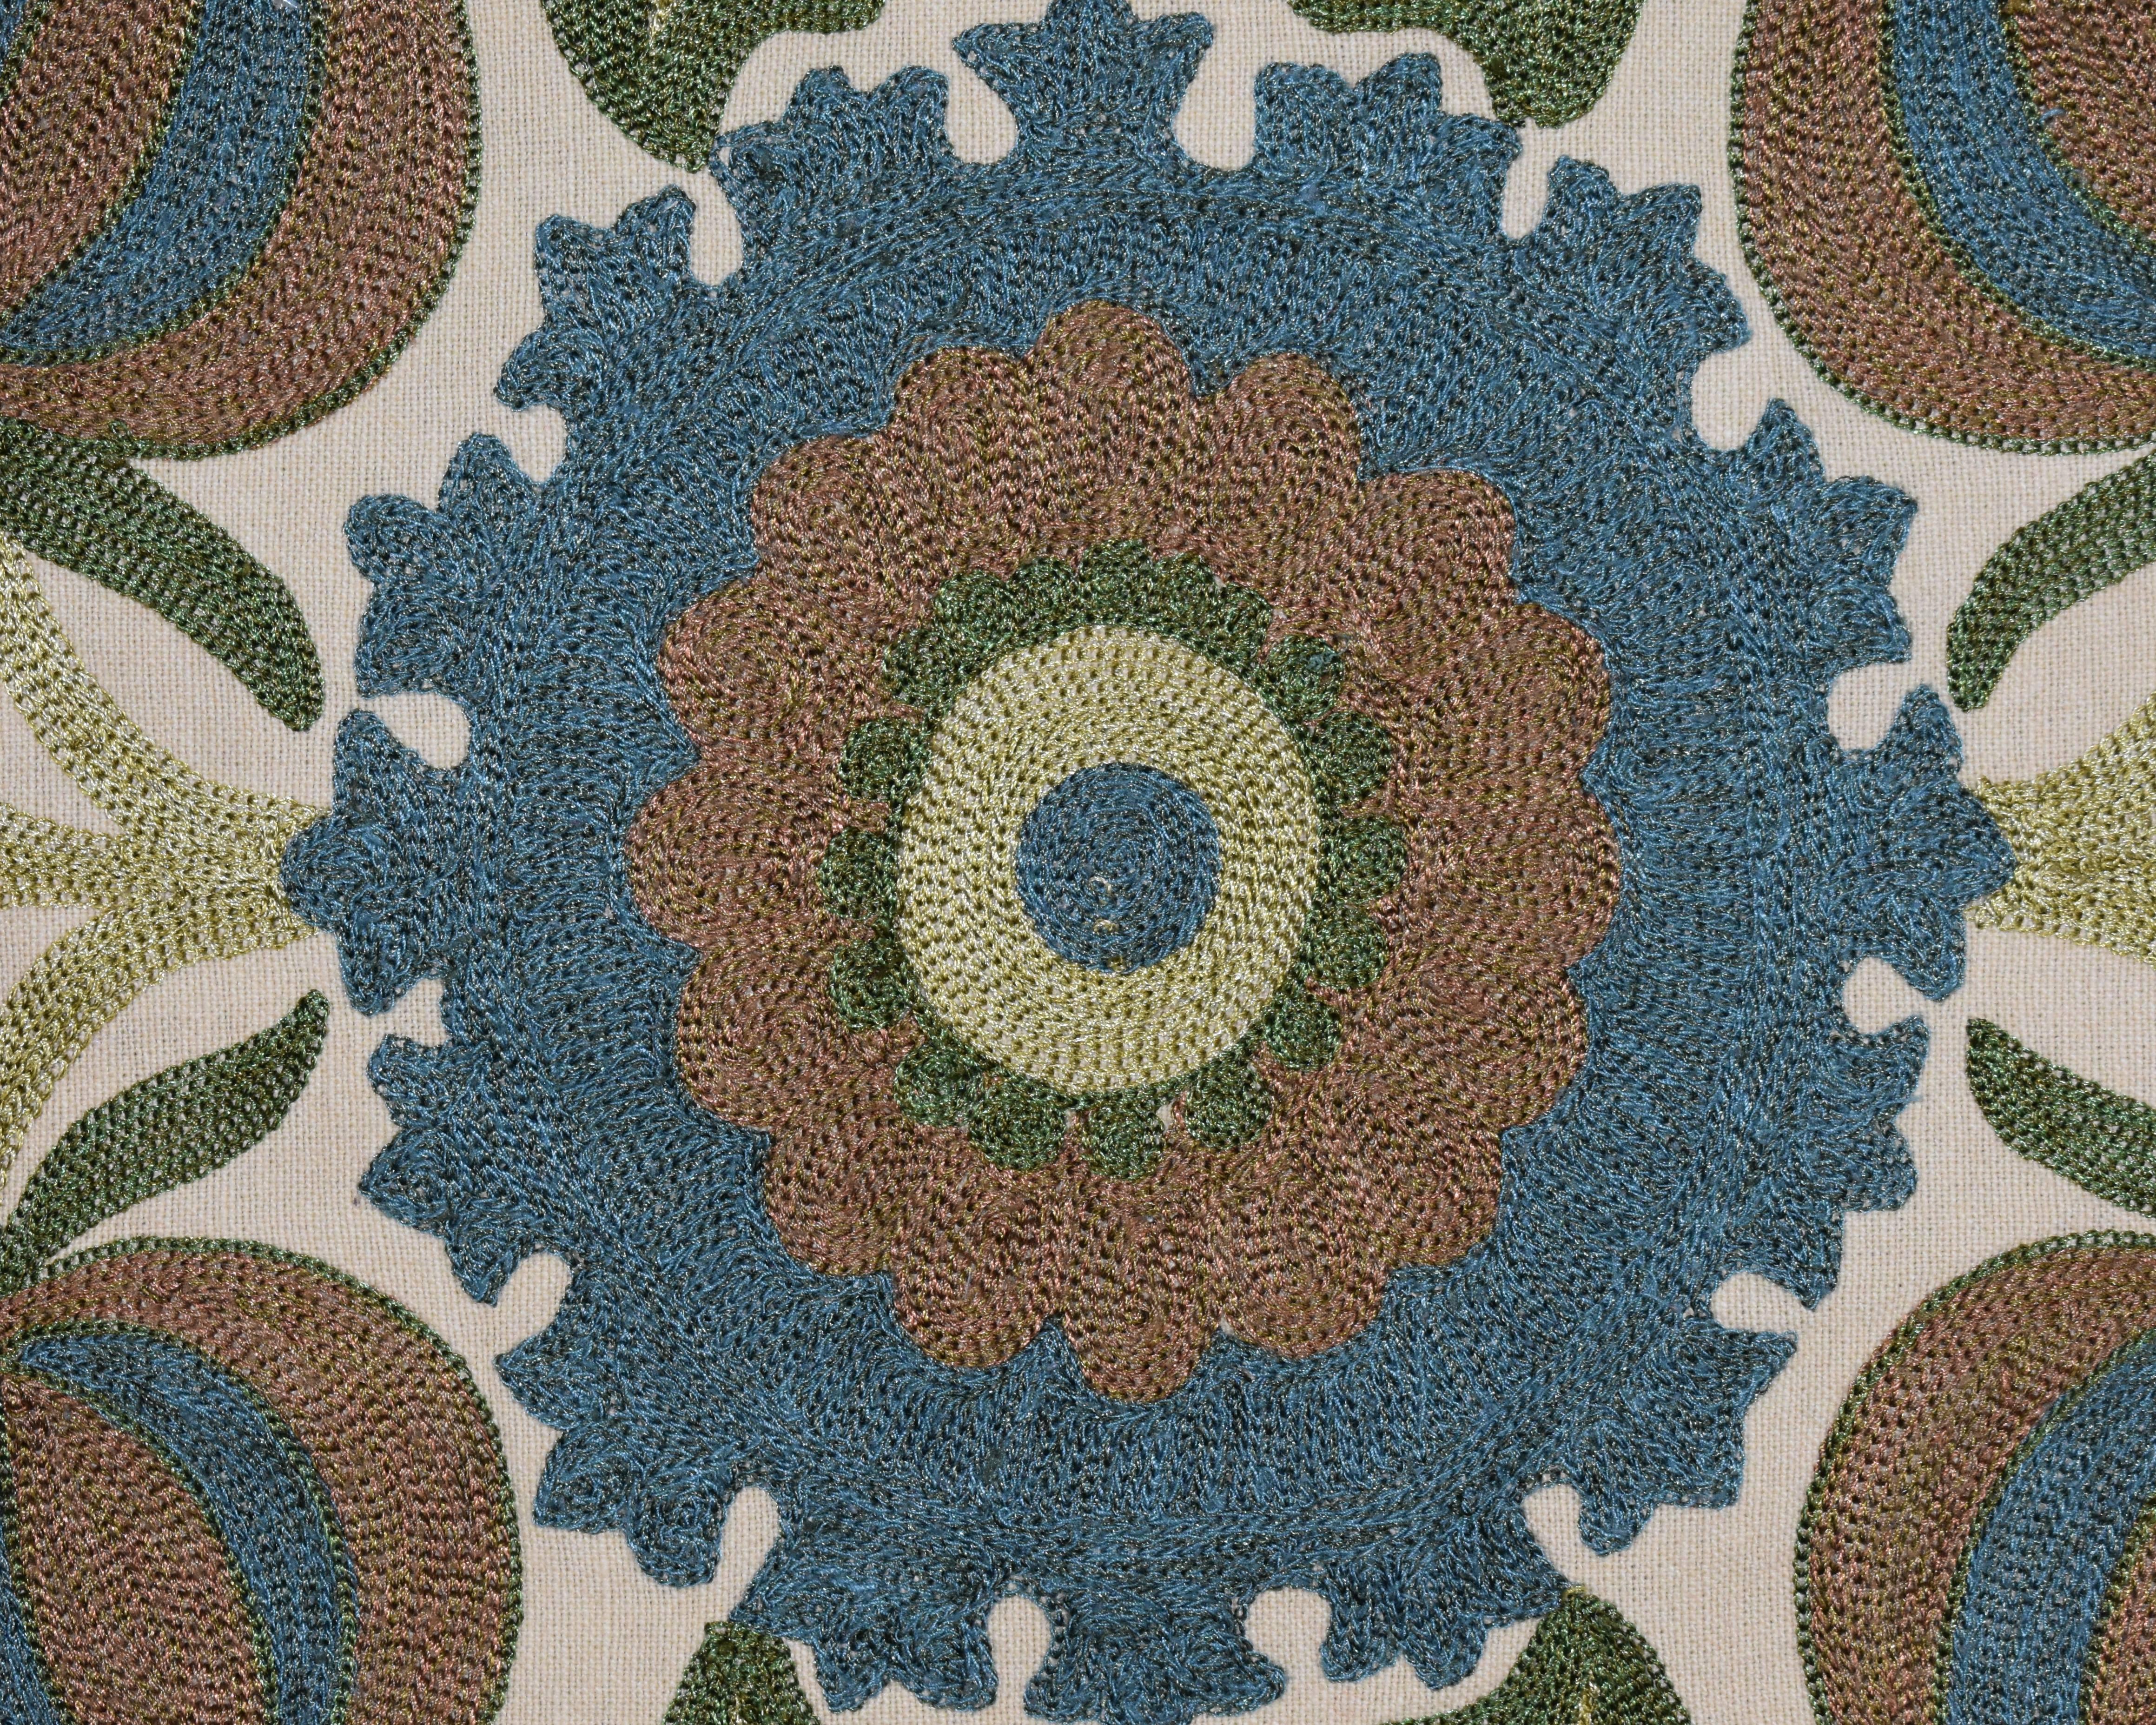 Pretty silk thread embroidered Central Asian Panel, sea green and blue stylised pomegranies and flowers embroidered on a light mocha coloured, cotton base

This piece will come into its element once framed, the edges being unhemmed as it must have